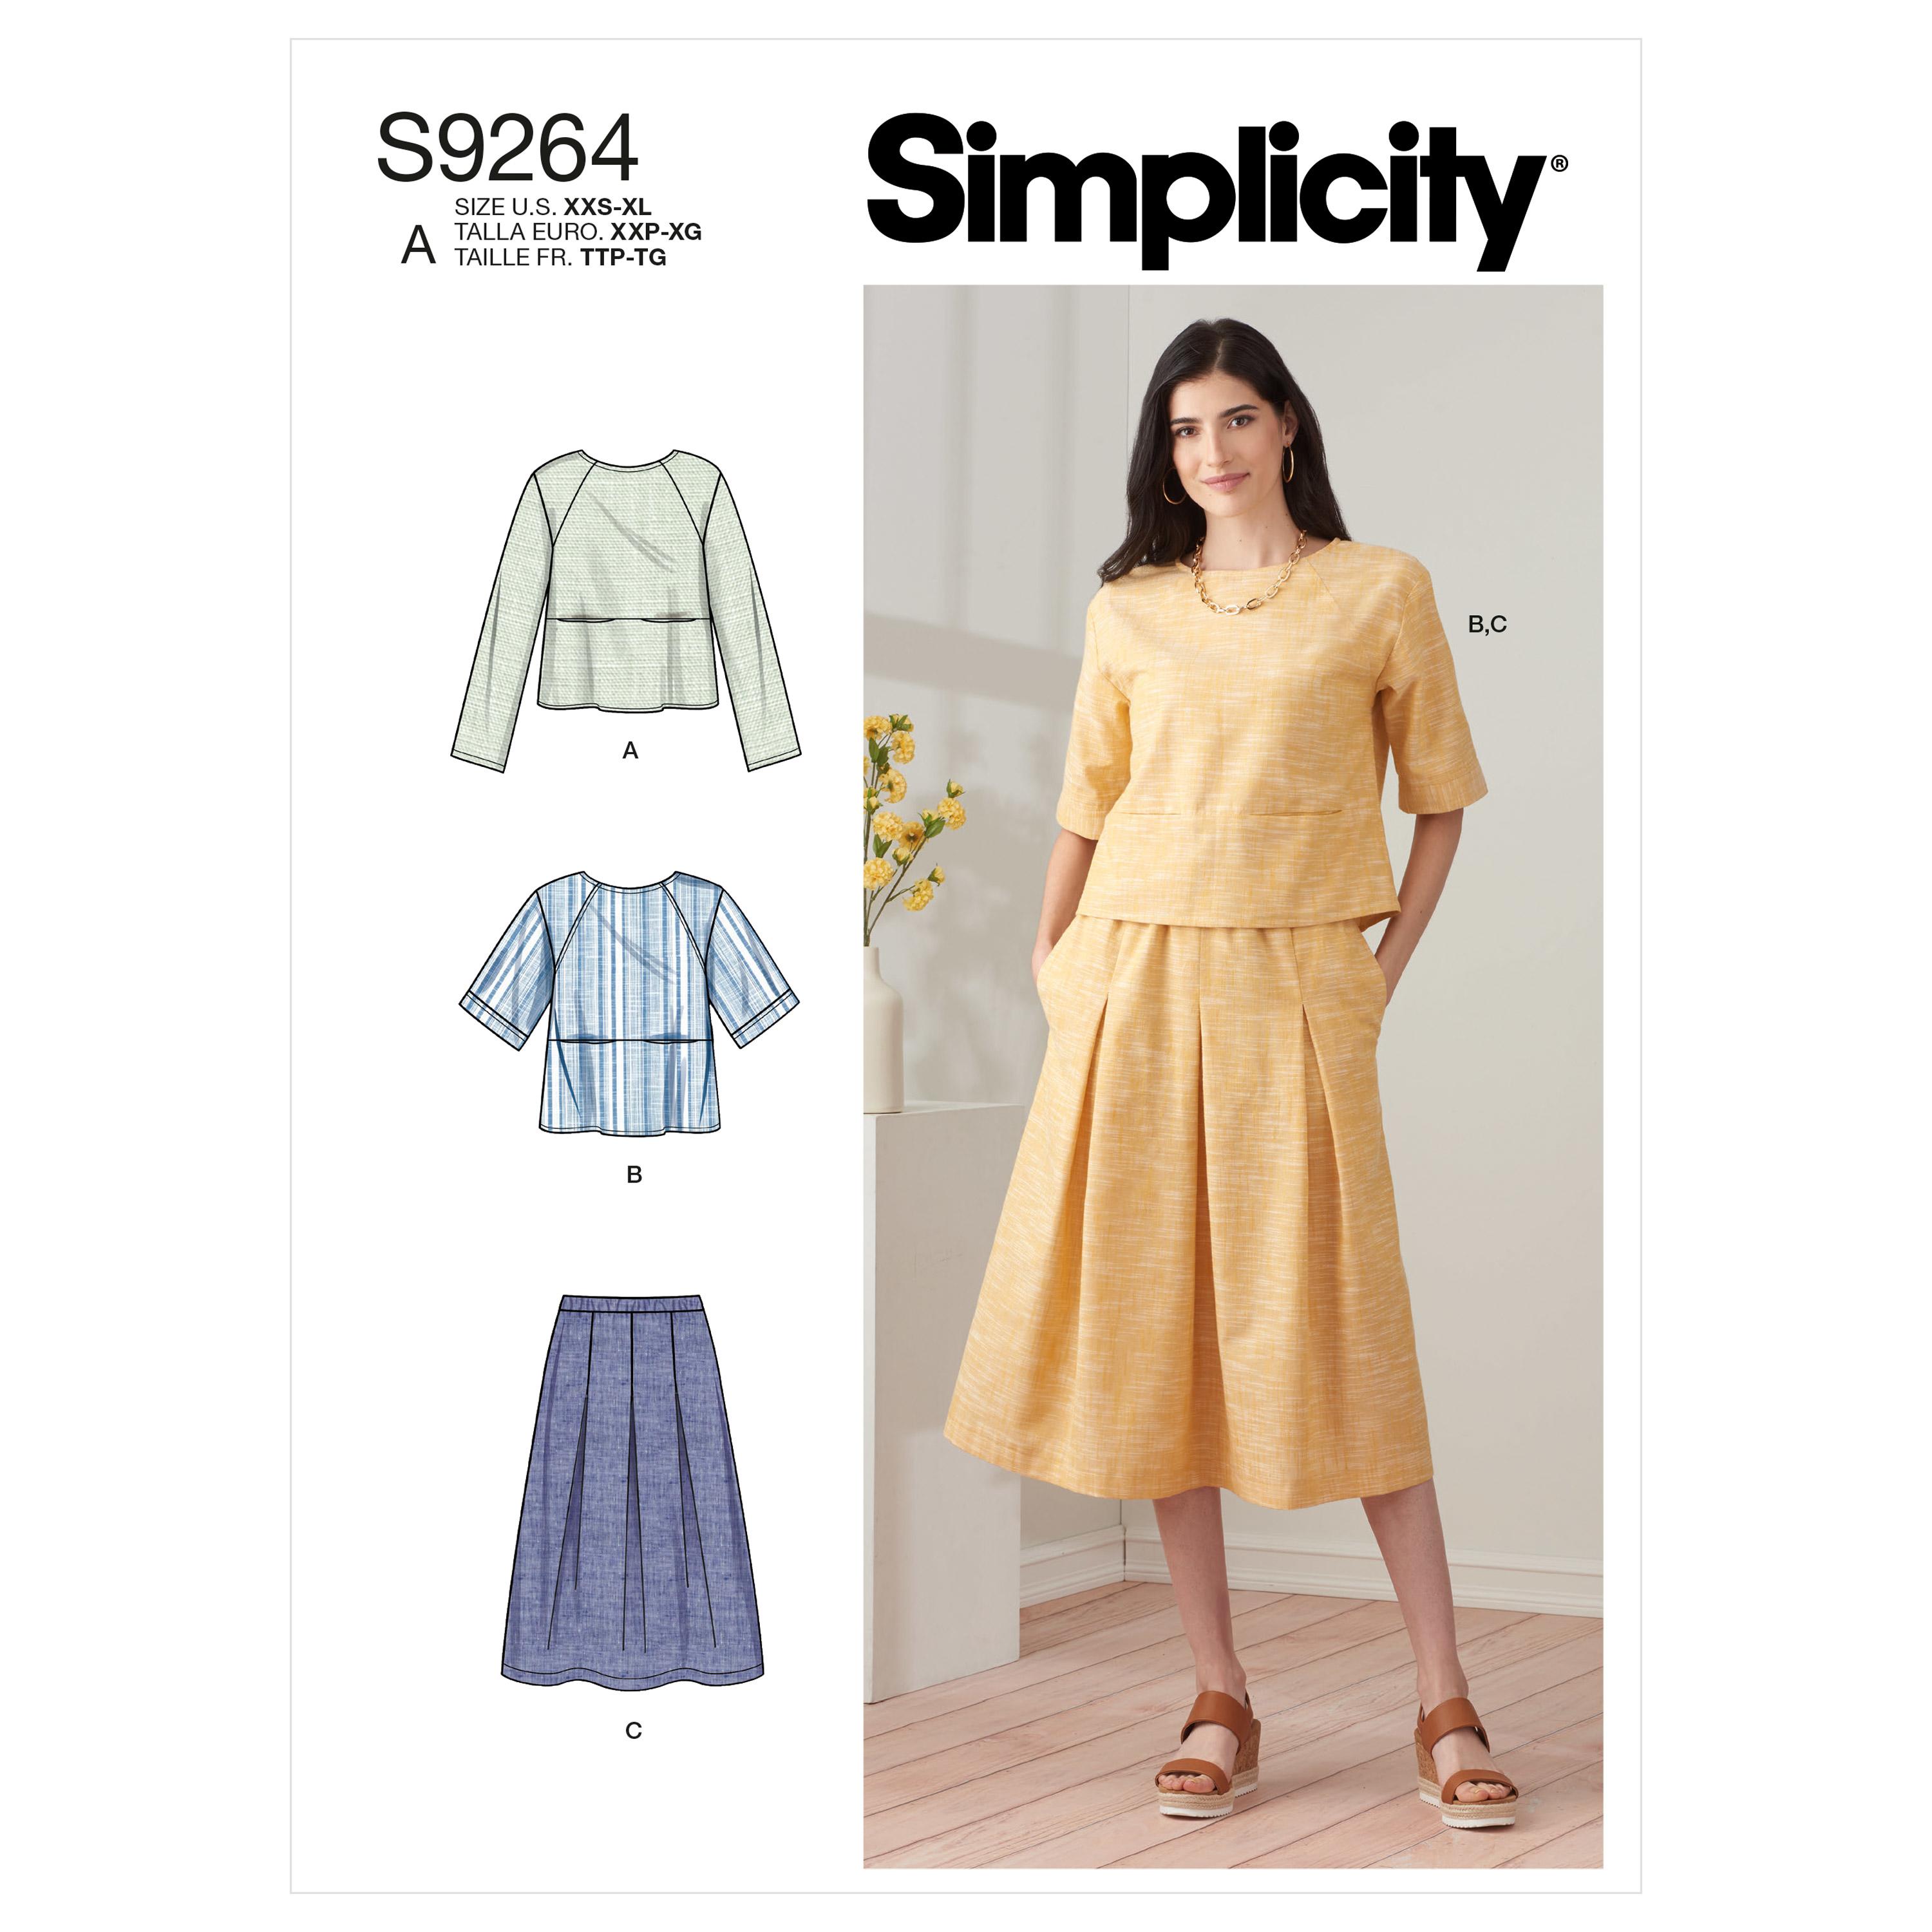 Simplicity Sewing Pattern S9264 Misses' Tops & Pull-on Skirt